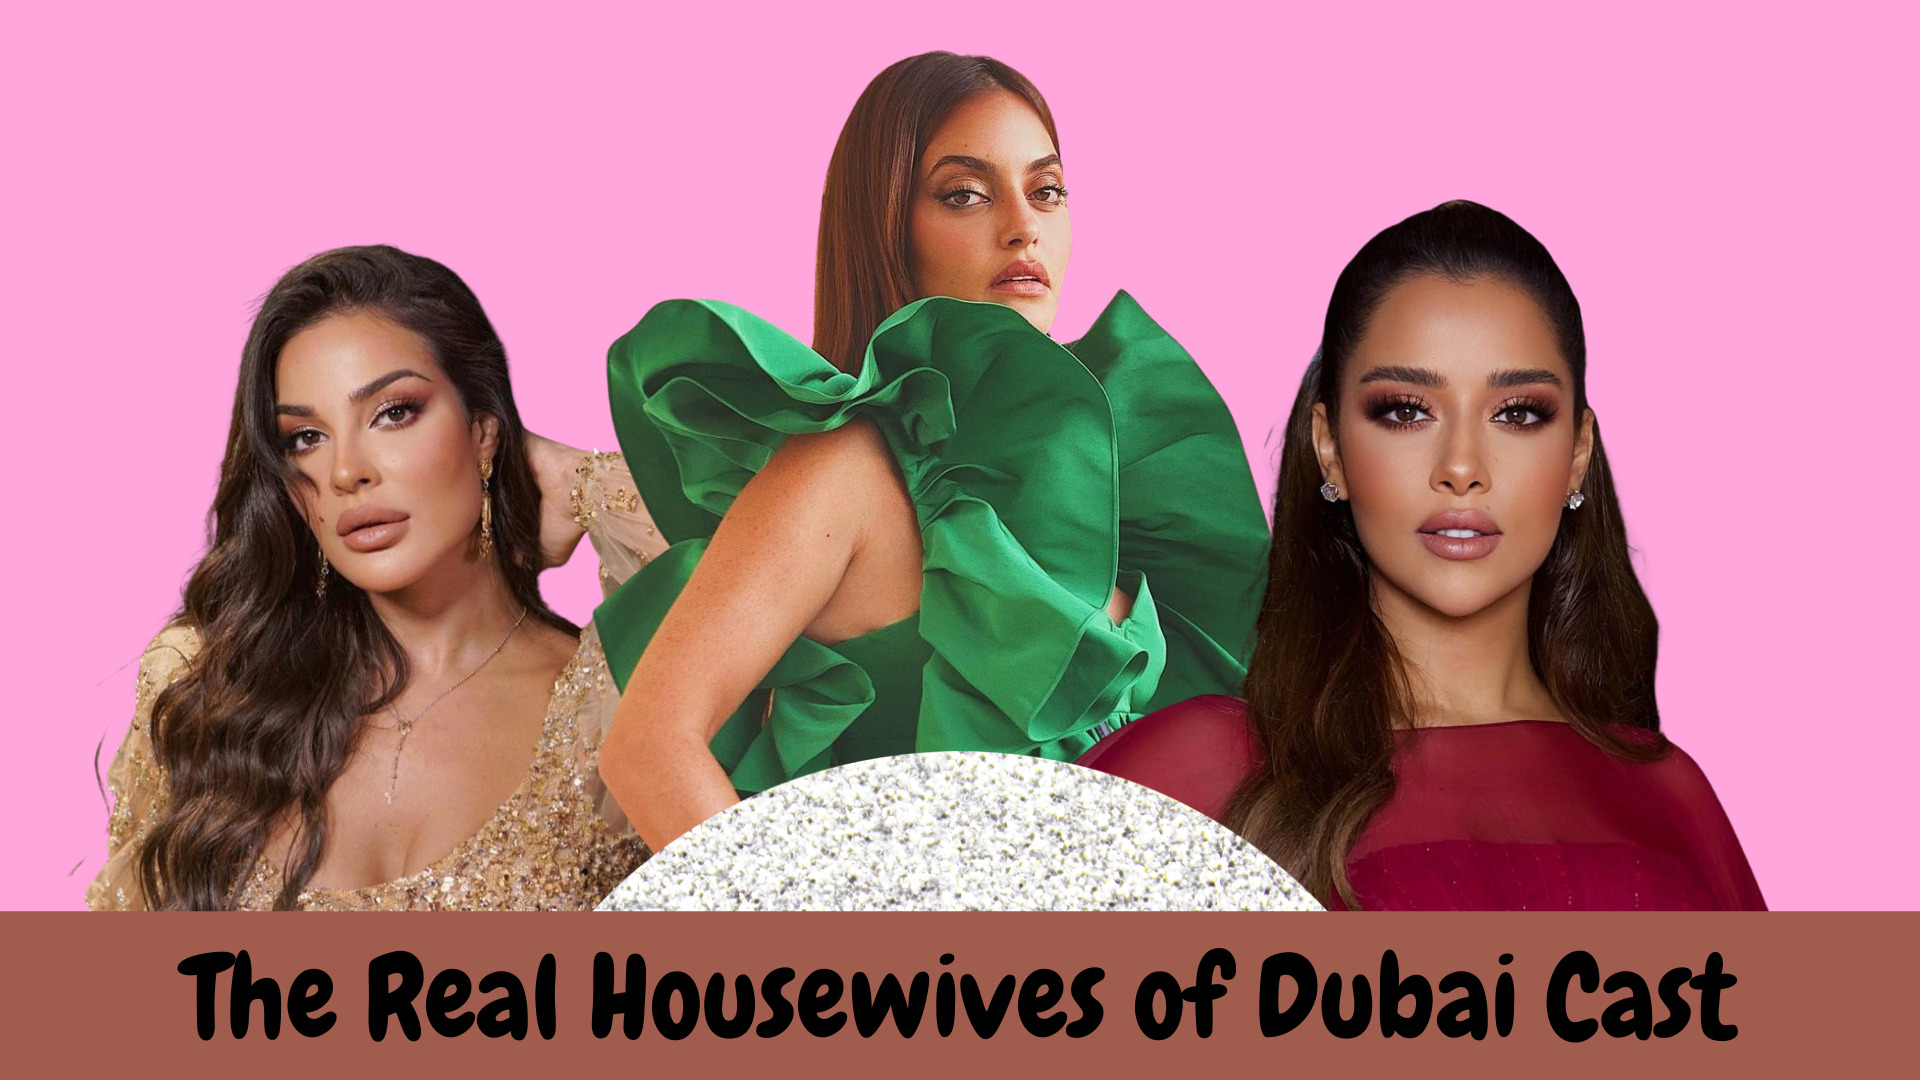 The Real Housewives of Dubai Cast